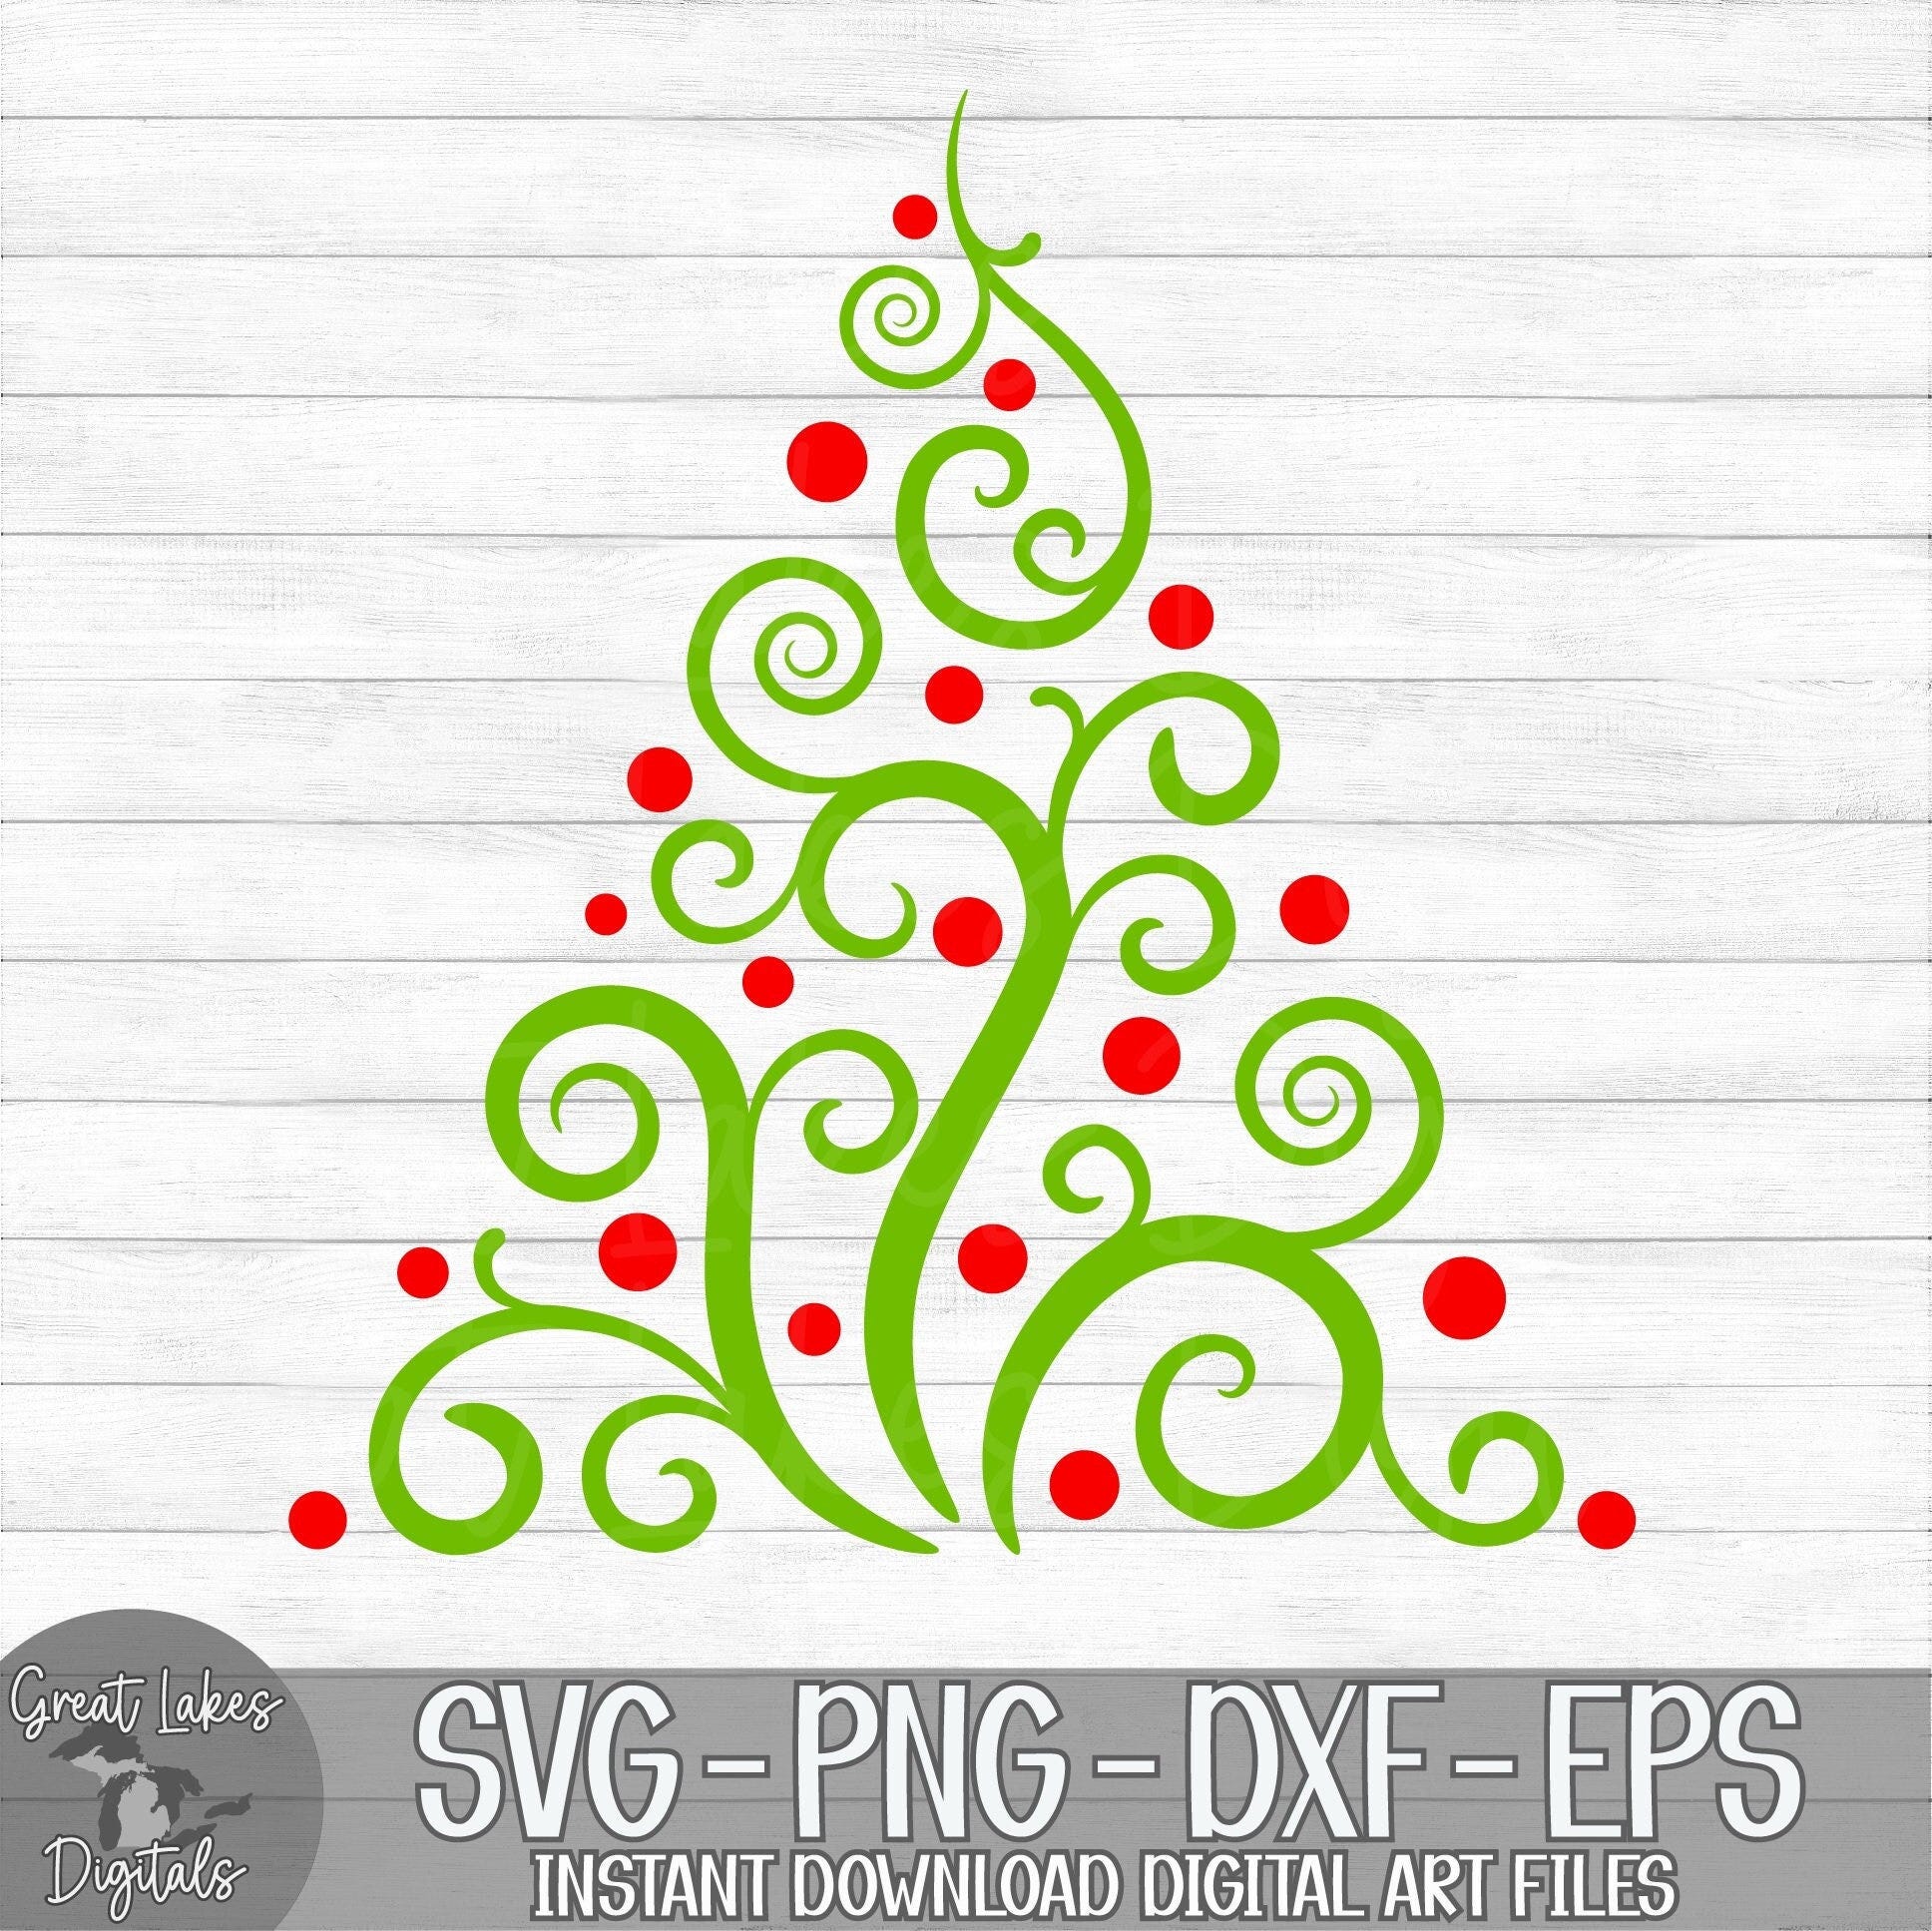 Swirly Christmas Tree - Instant Digital Download - svg, png, dxf, and eps files included! Winter, Pine Tree, Ornaments